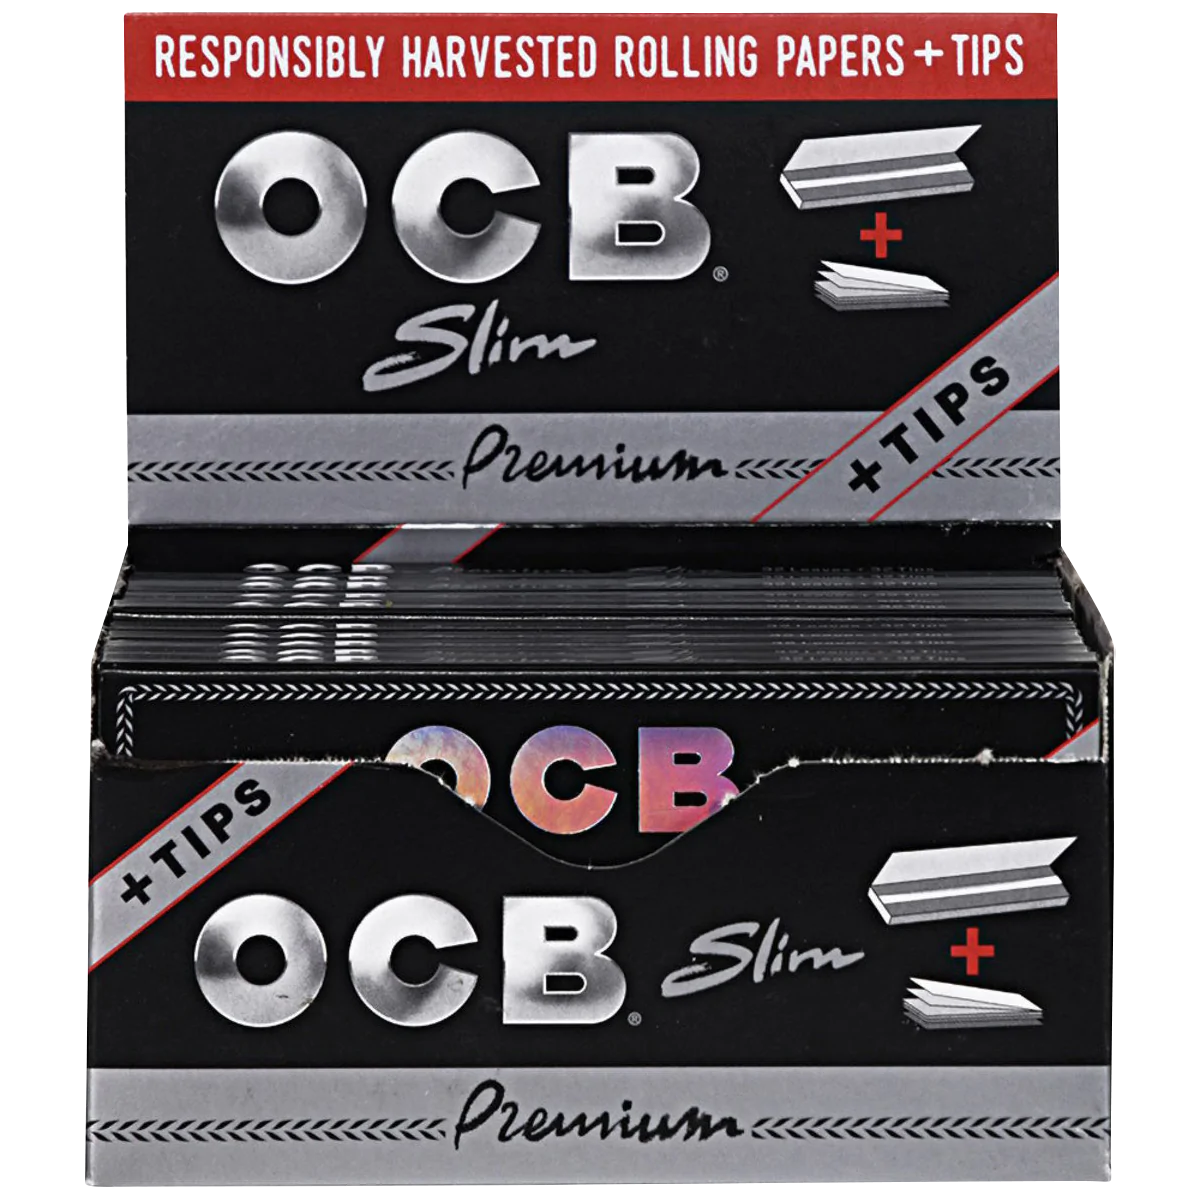 OCB Premium Slim Rolling Papers & Tips 24 Pack, front view on white background